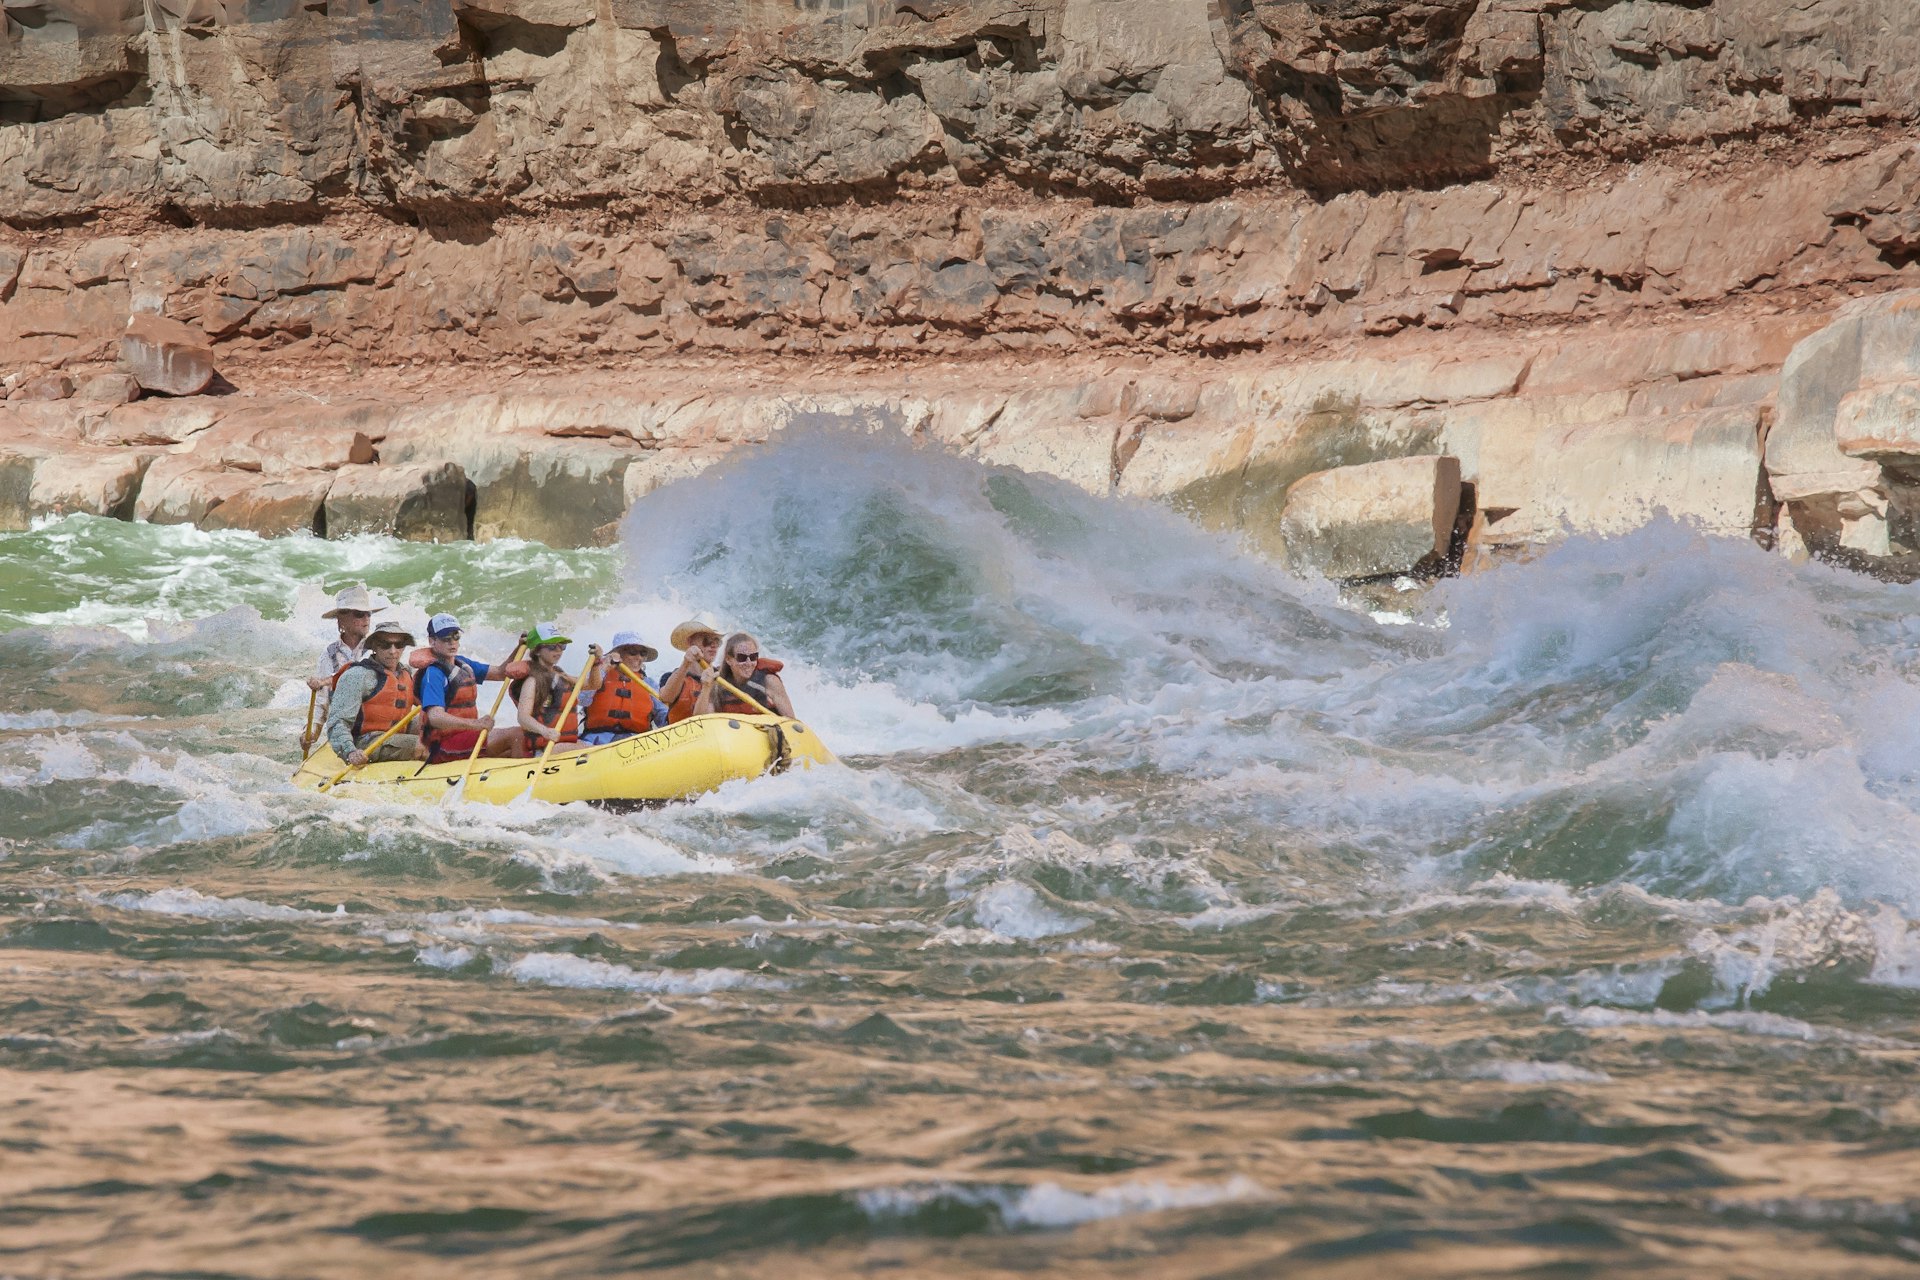 A group paddles a raft through rapids in Grand Canyon National Park, Arizona, USA